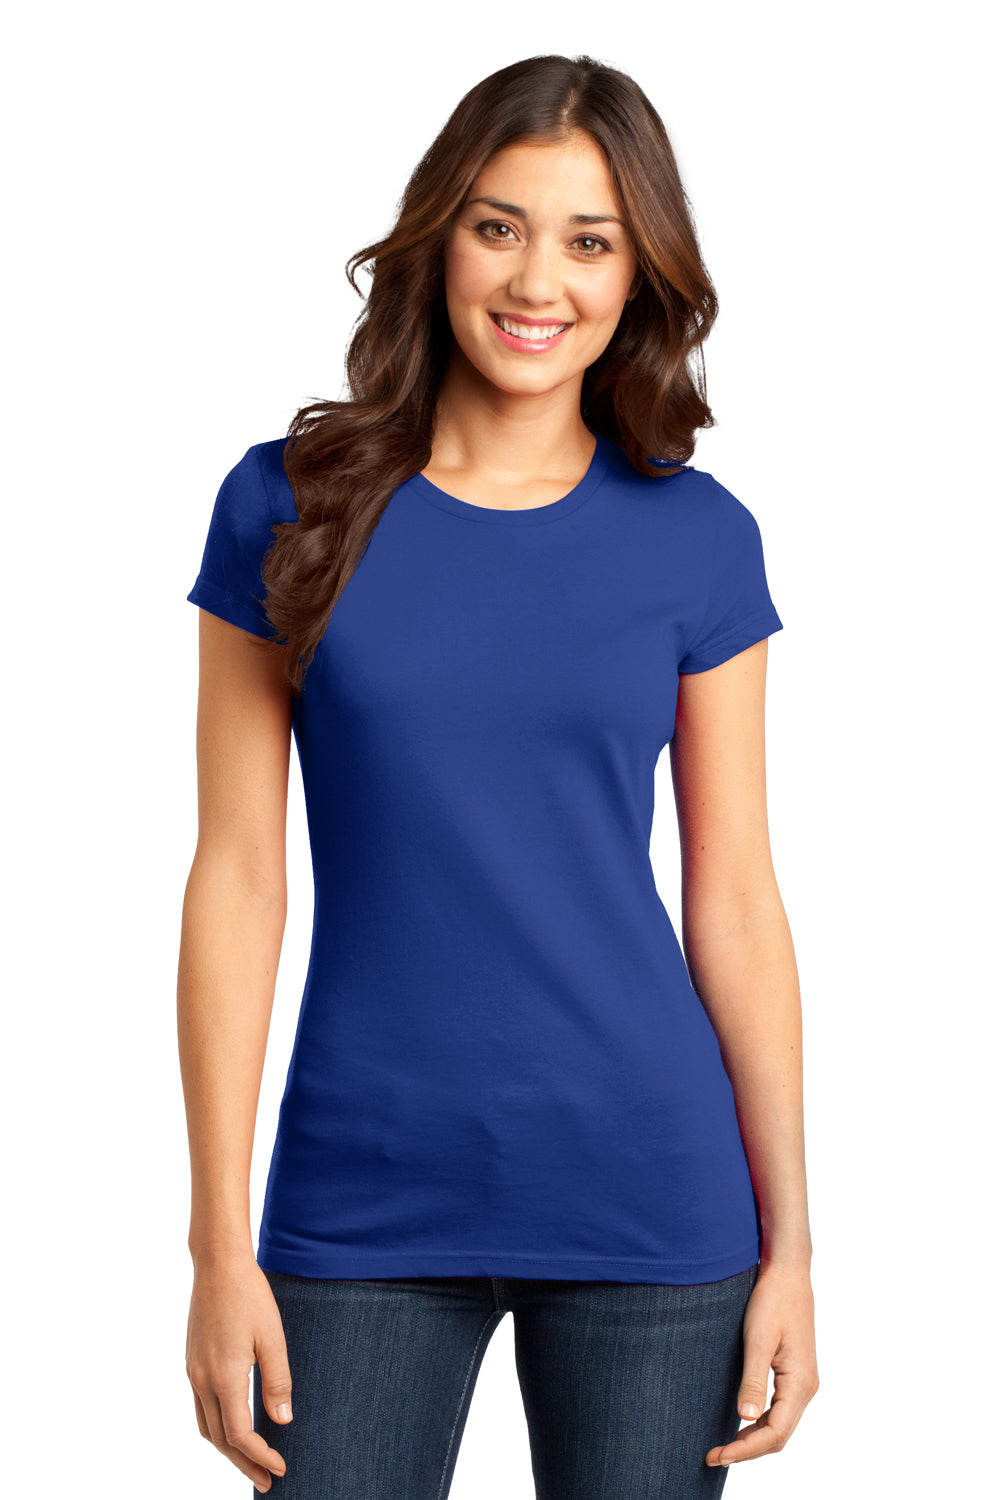 District DT6001 Womens Very Important Short Sleeve Crewneck T-Shirt Royal Blue Front